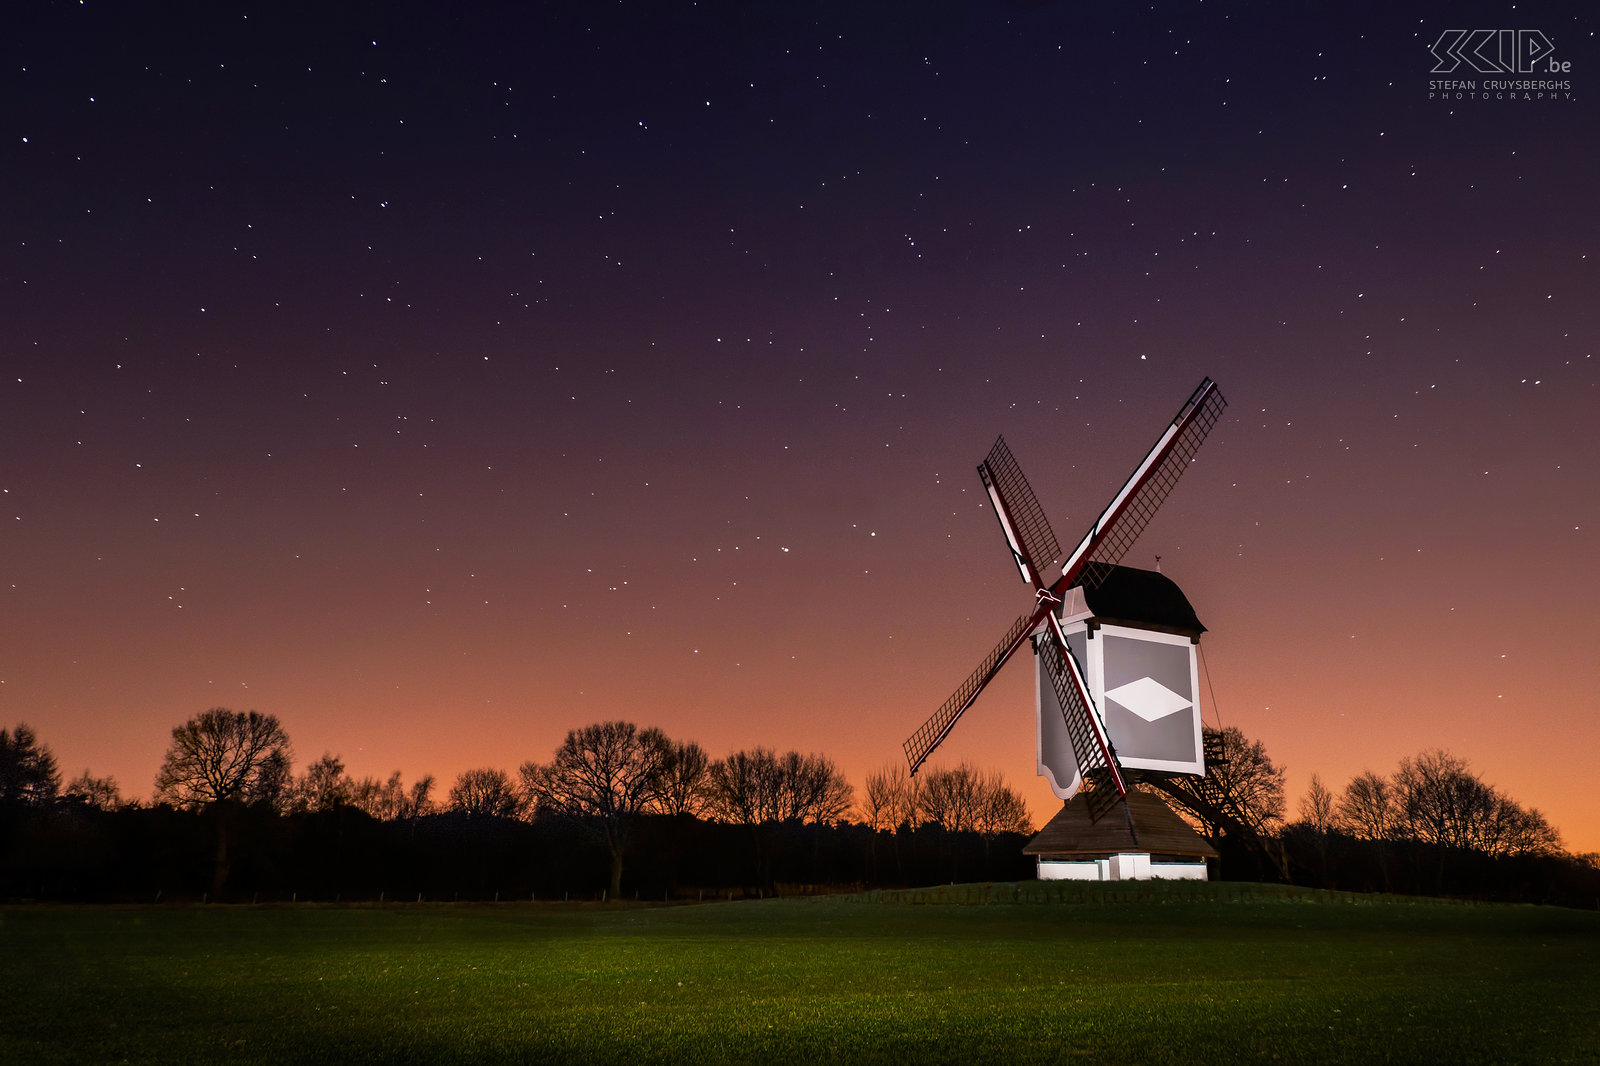 Lommel by night - Leyssens mill The Leyssens mill is an old mill tower from 1797 which has been moved and renovated in 2012. Stefan Cruysberghs